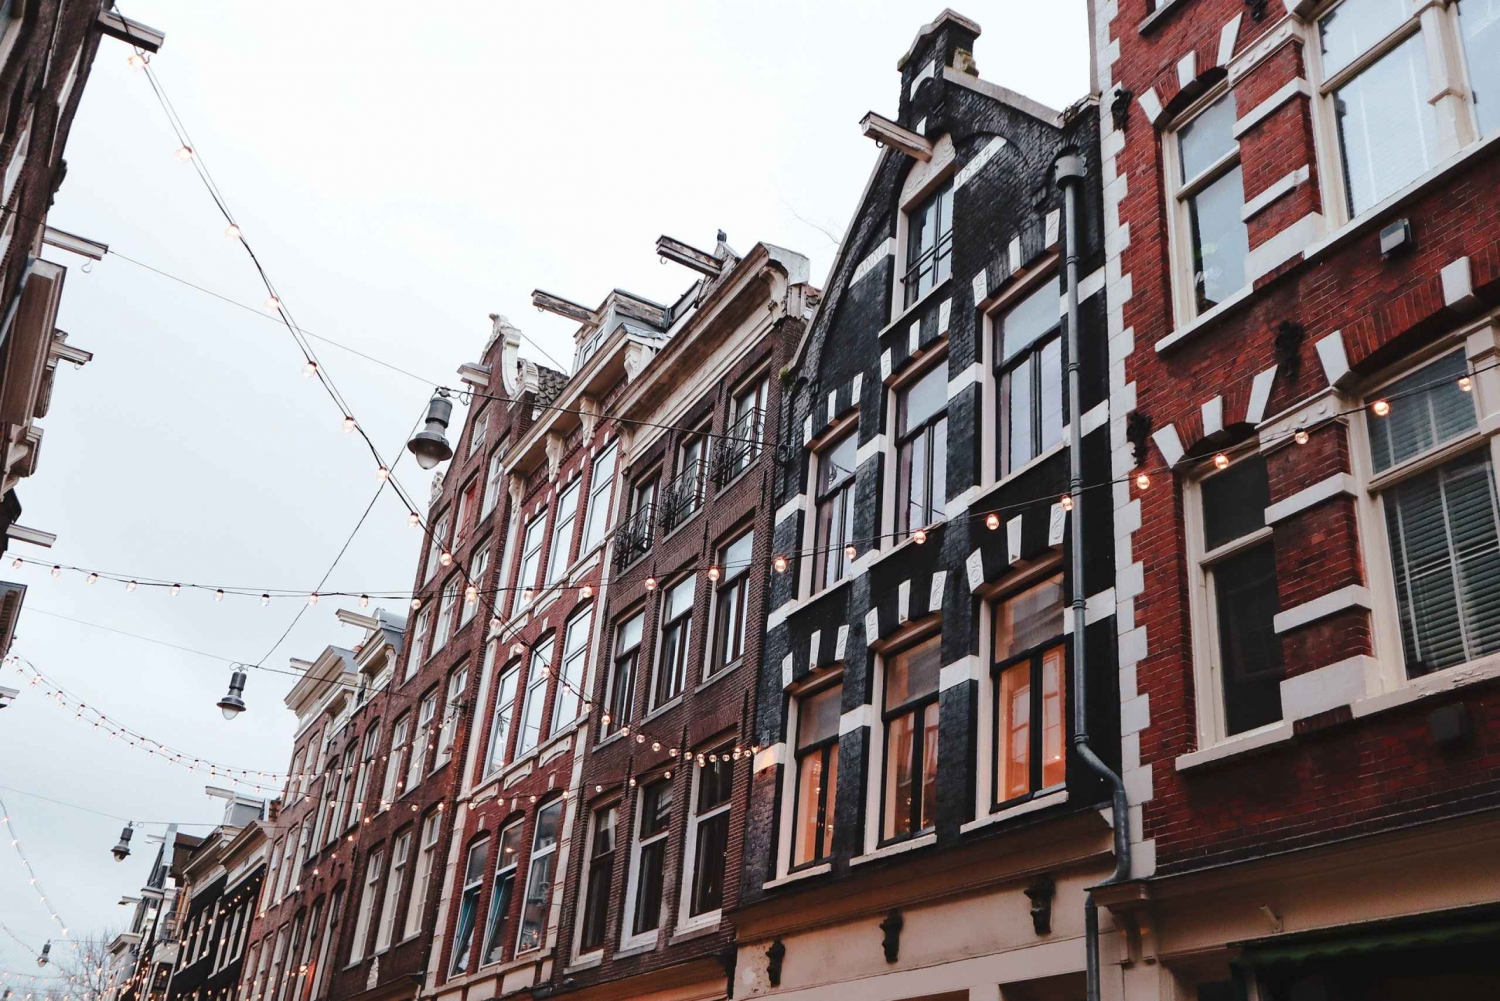 Amsterdam: Discover the highlights with guided audio tour